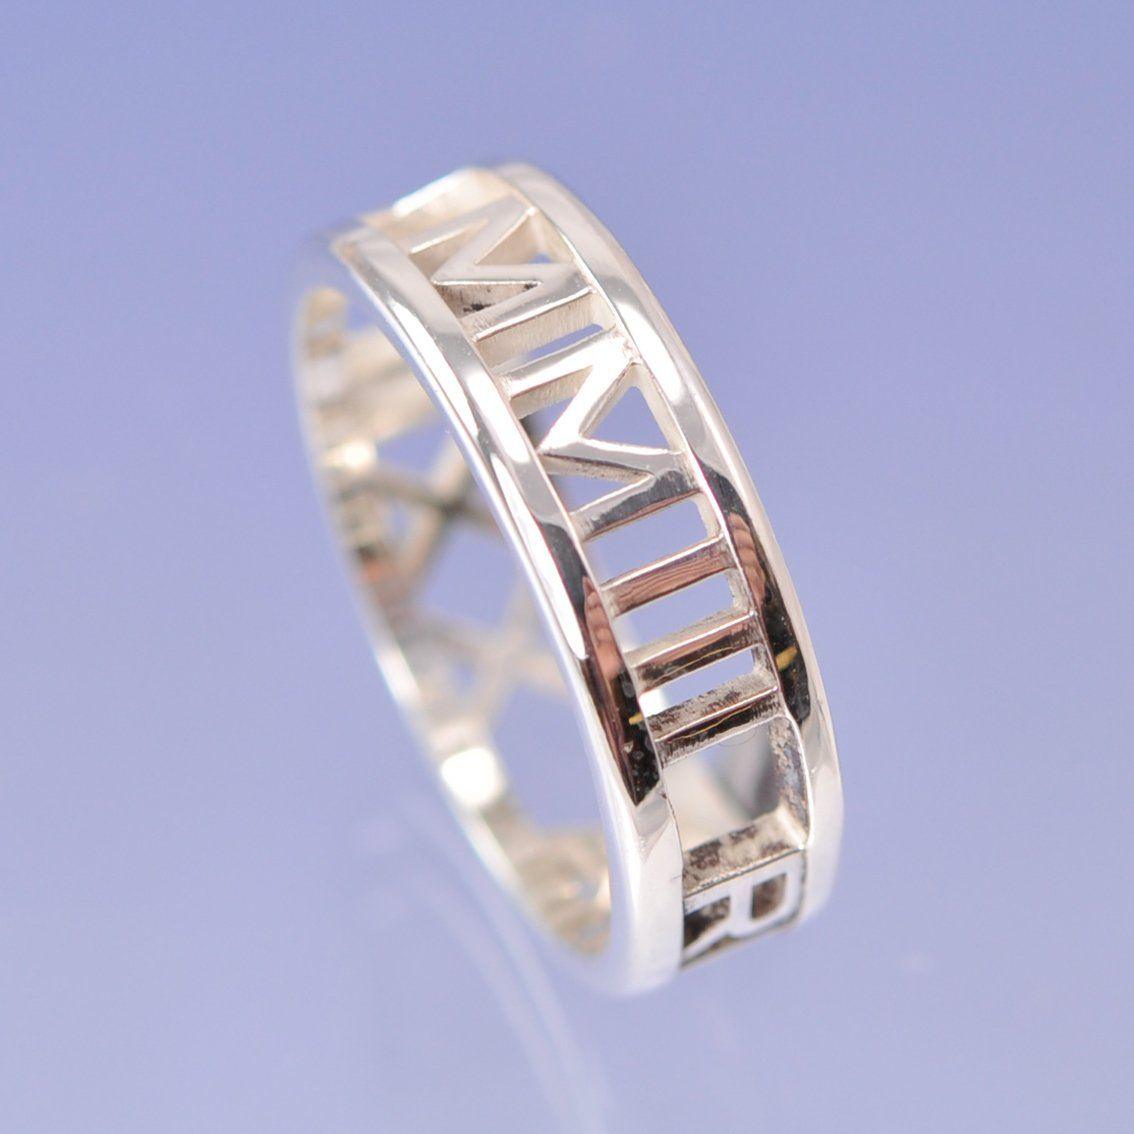 The Copperplate Ring Ring by Chris Parry Jewellery